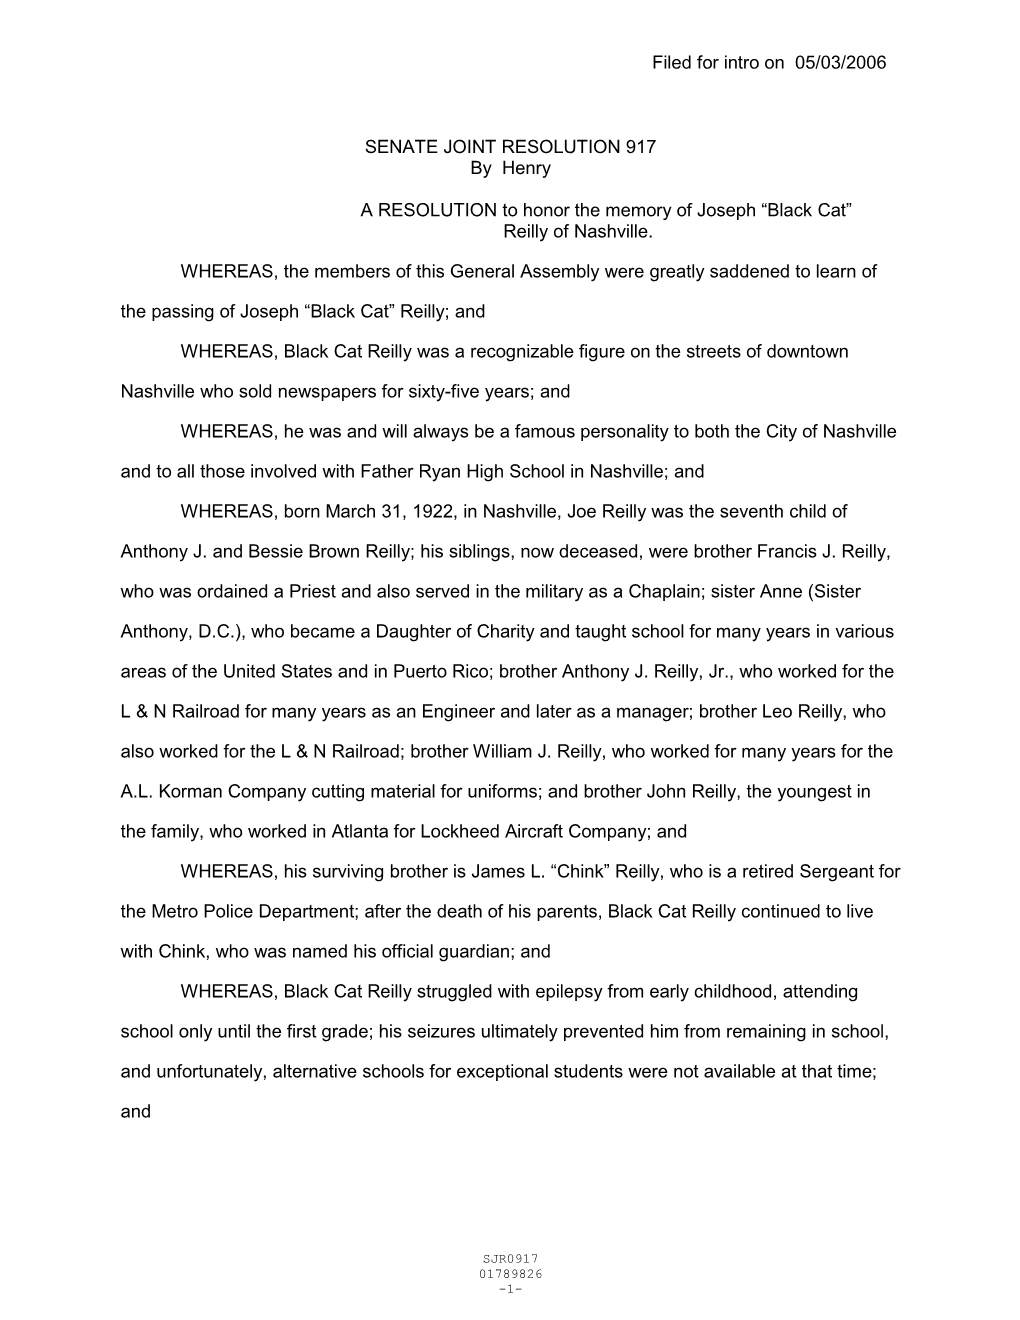 Filed for Intro on 05/03/2006 SENATE JOINT RESOLUTION 917 by Henry